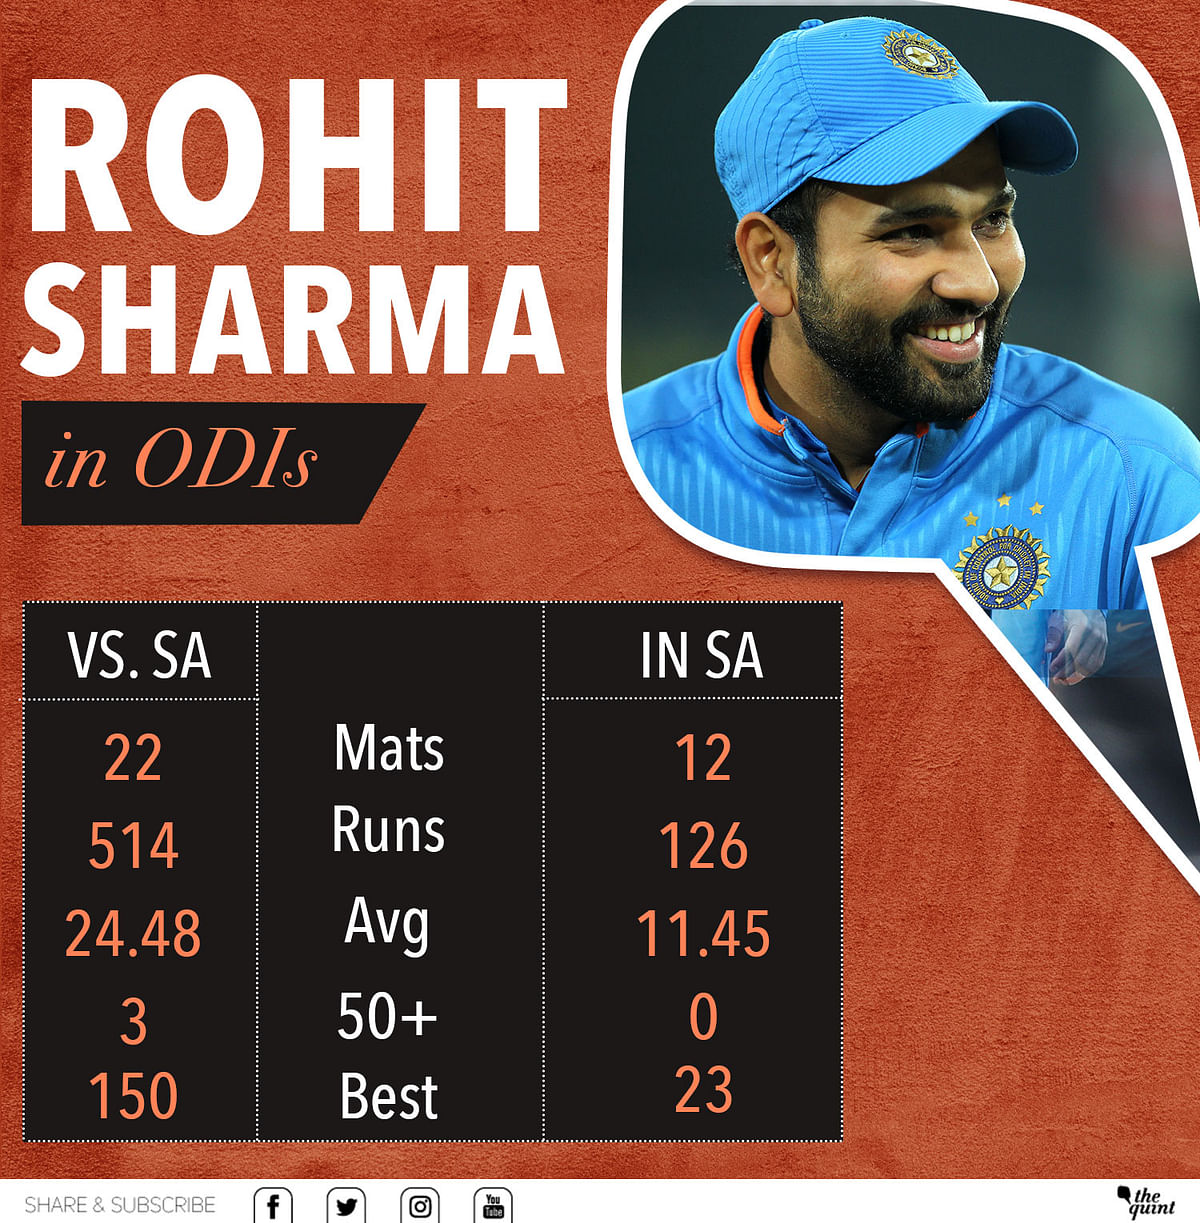 Rohit Sharma has done very little against South Africa – definitely not on this tour, and very little earlier.